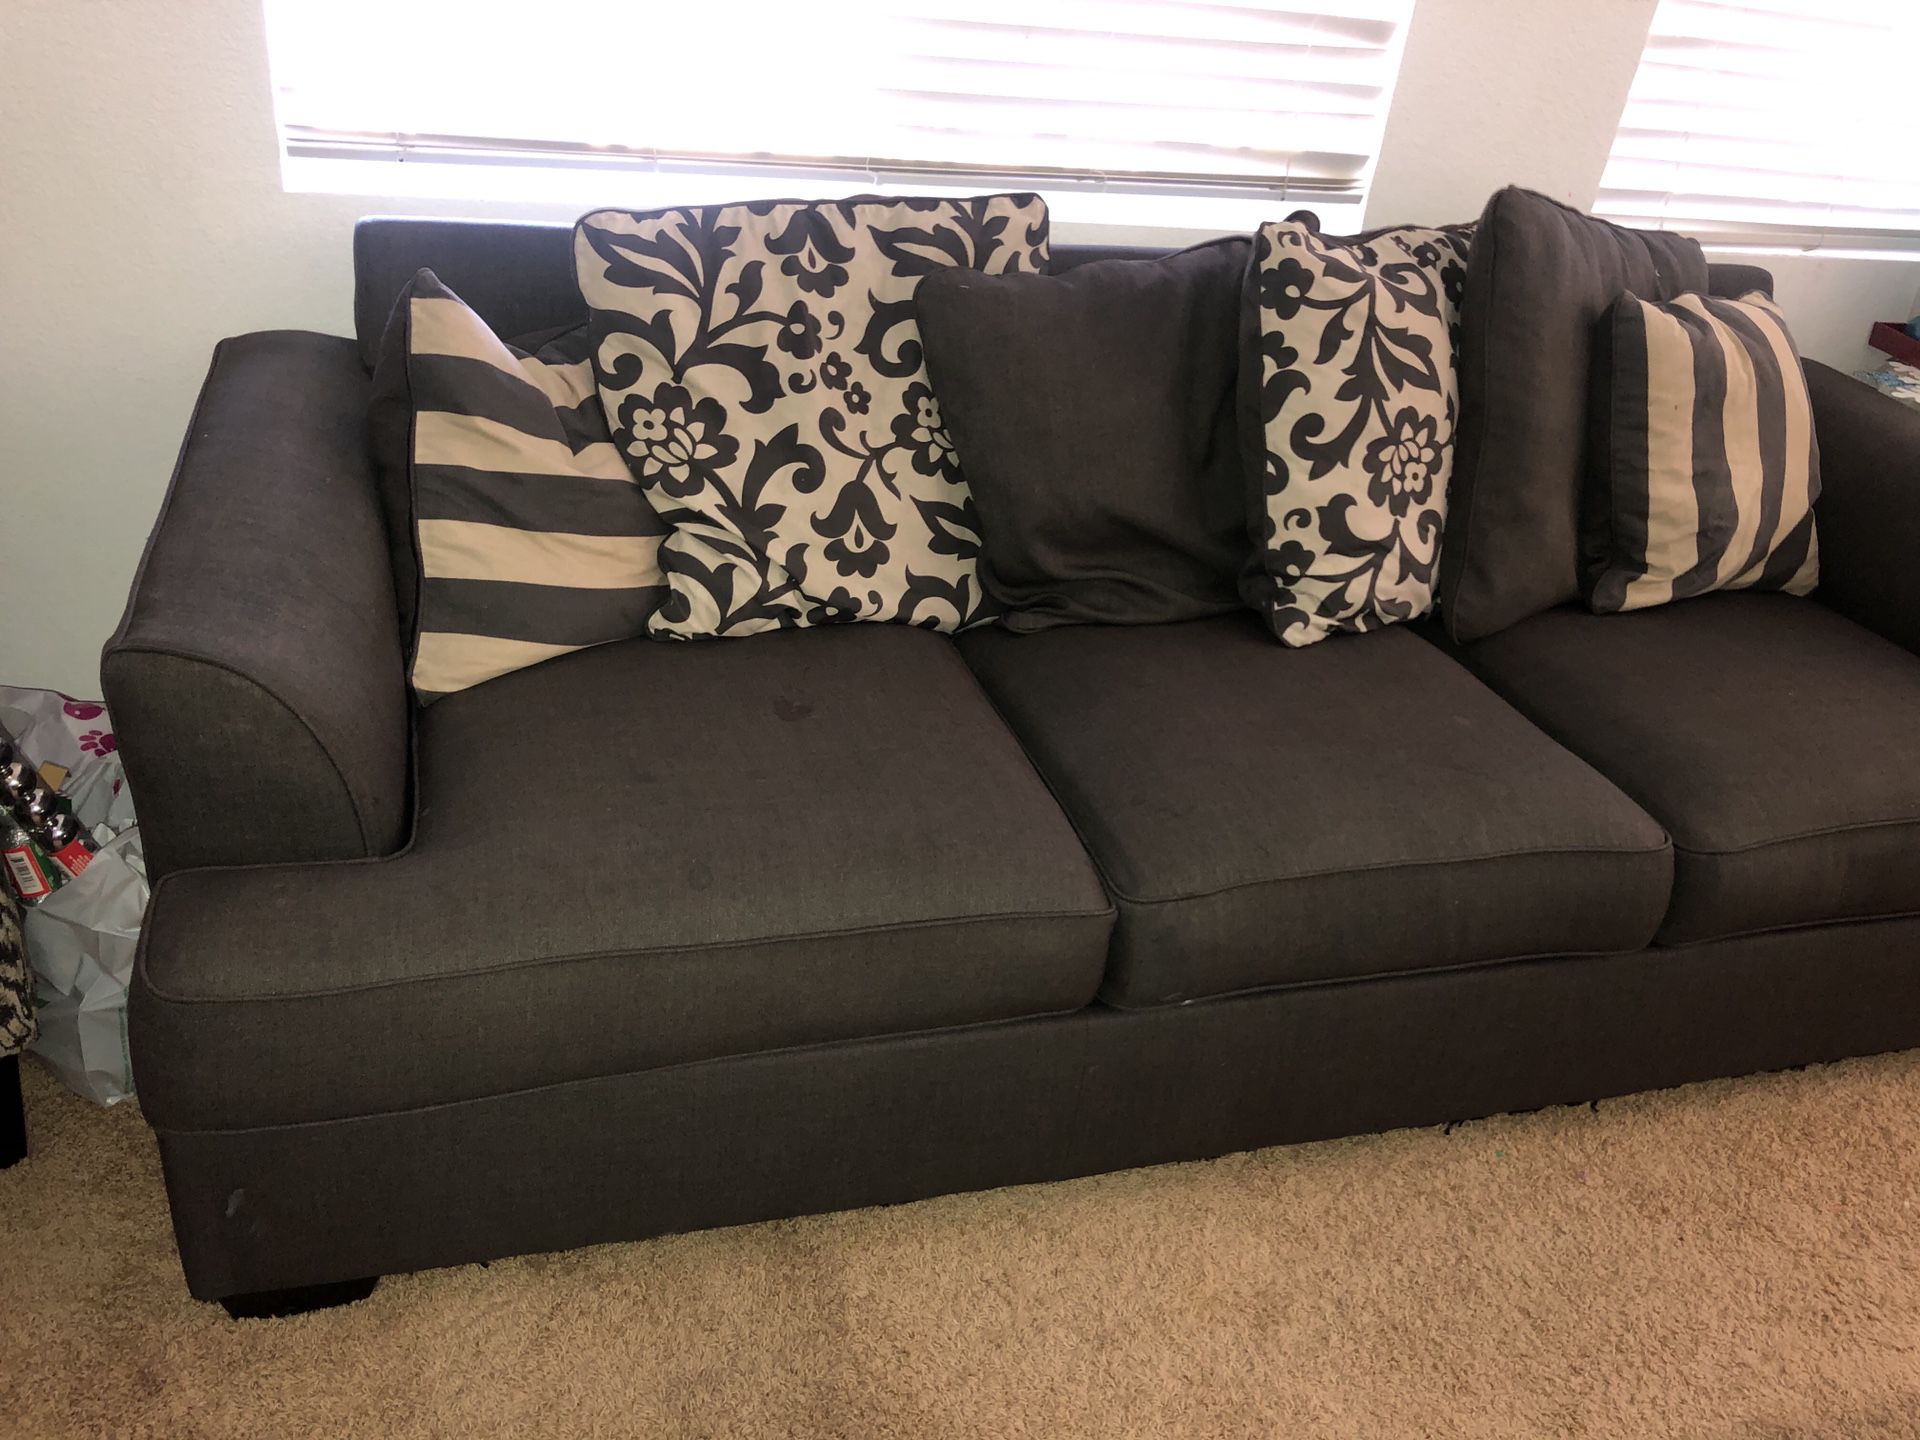 Free couch , it’s light gray